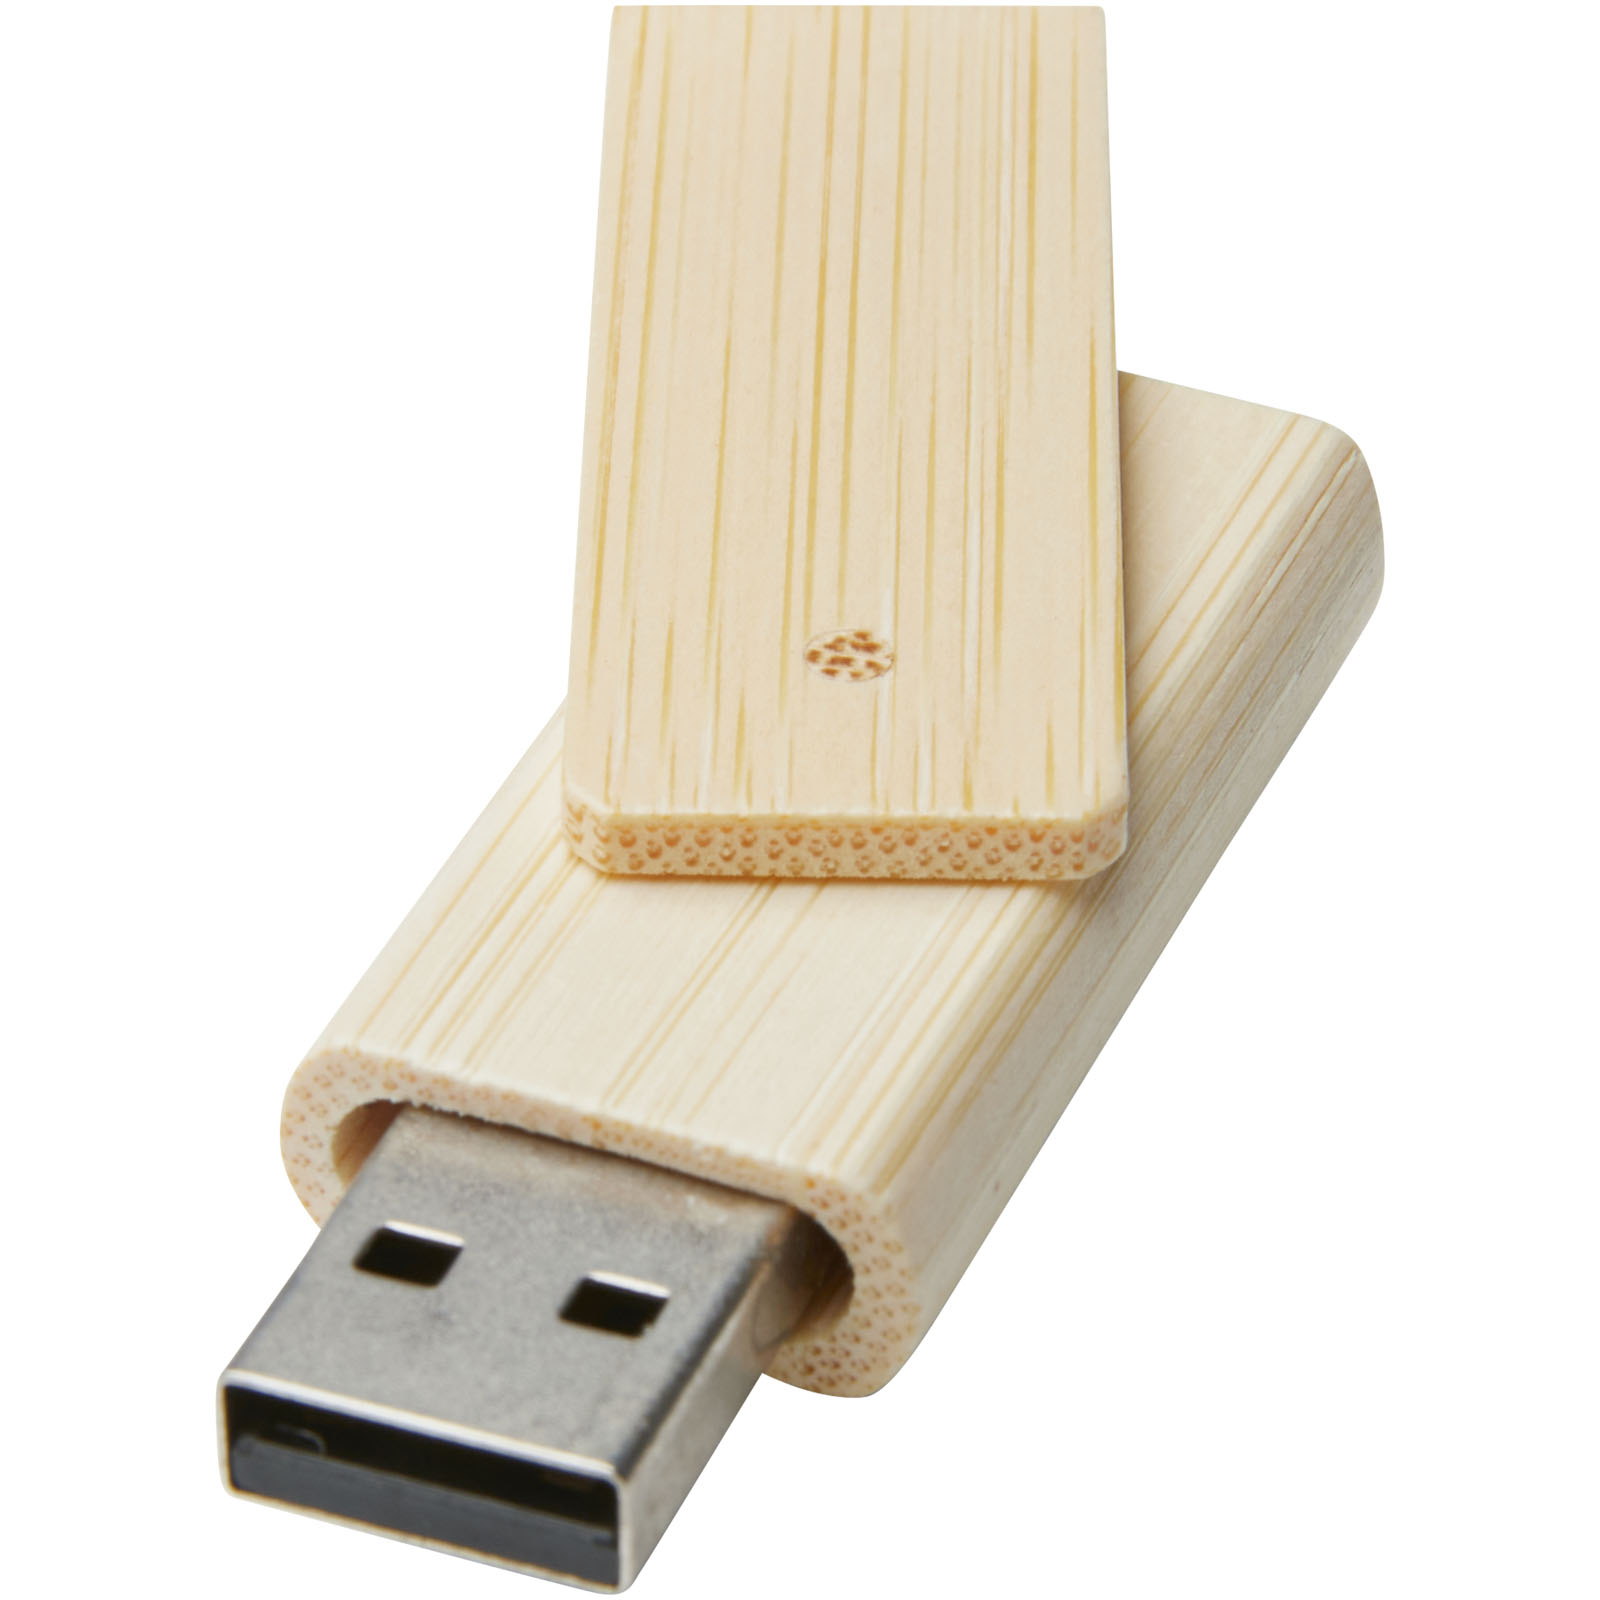 16GB bamboo USB flash drive with rotating cover - Mortimer